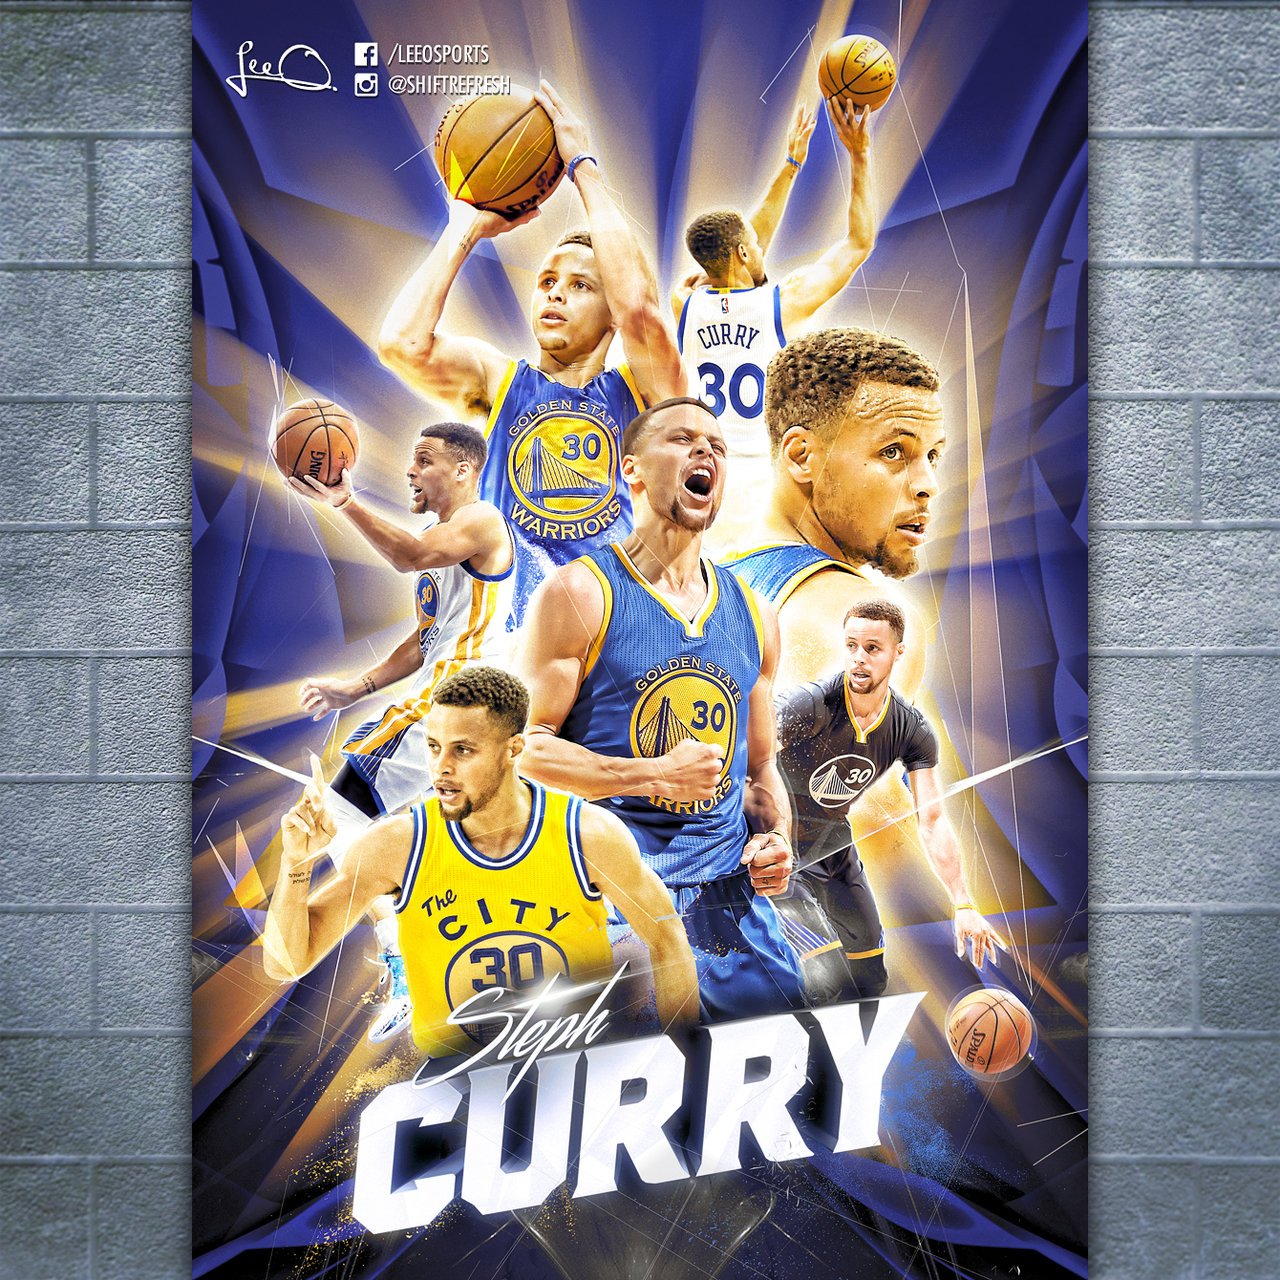 Cartoon Stephen Curry Wallpapers